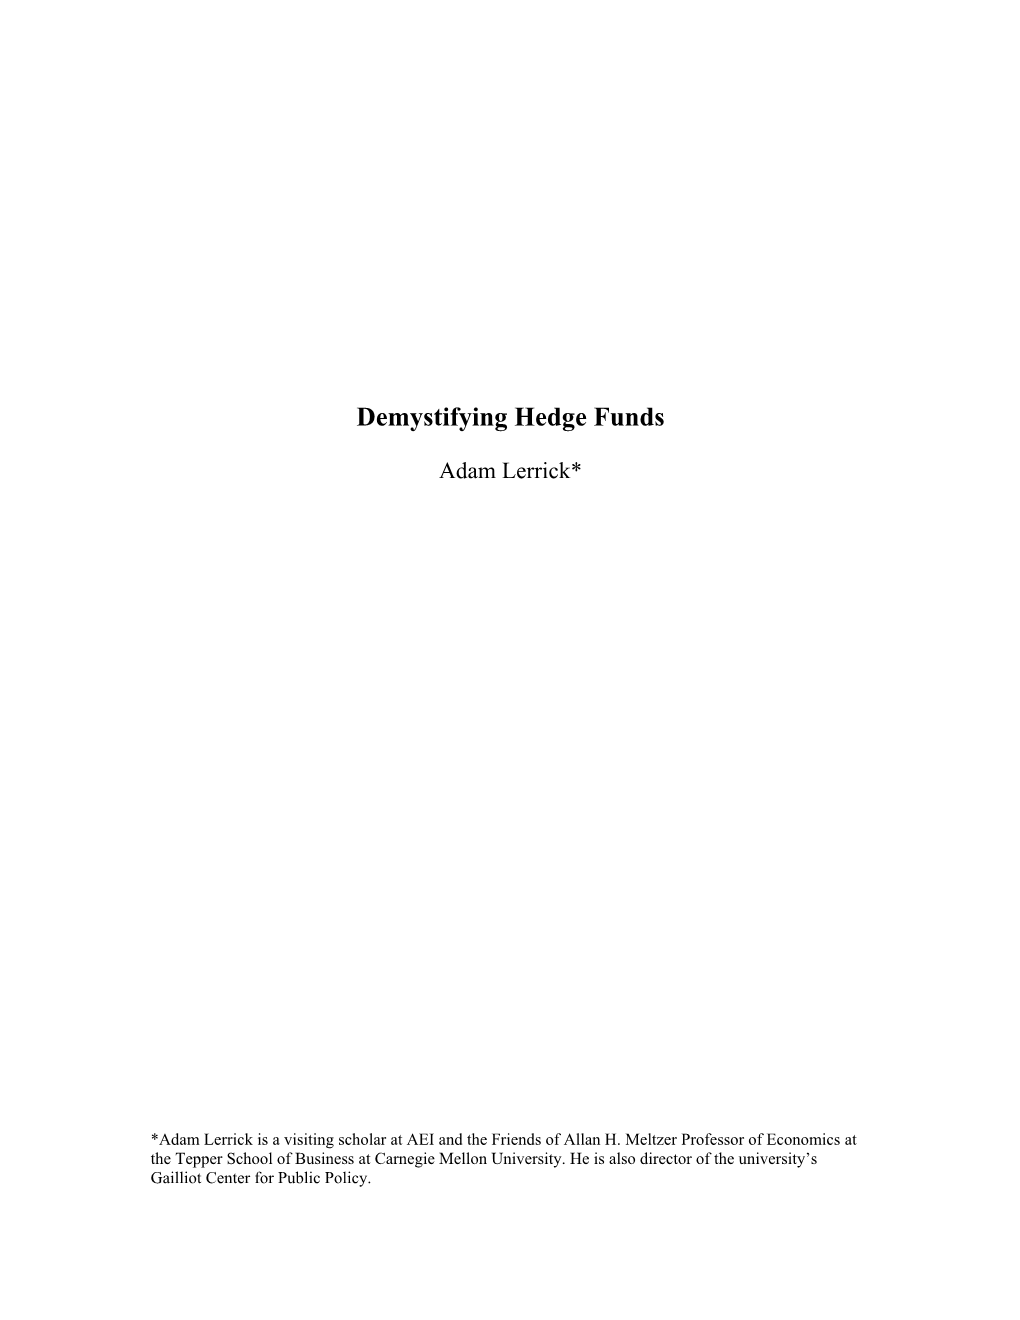 Demystifying Hedge Funds